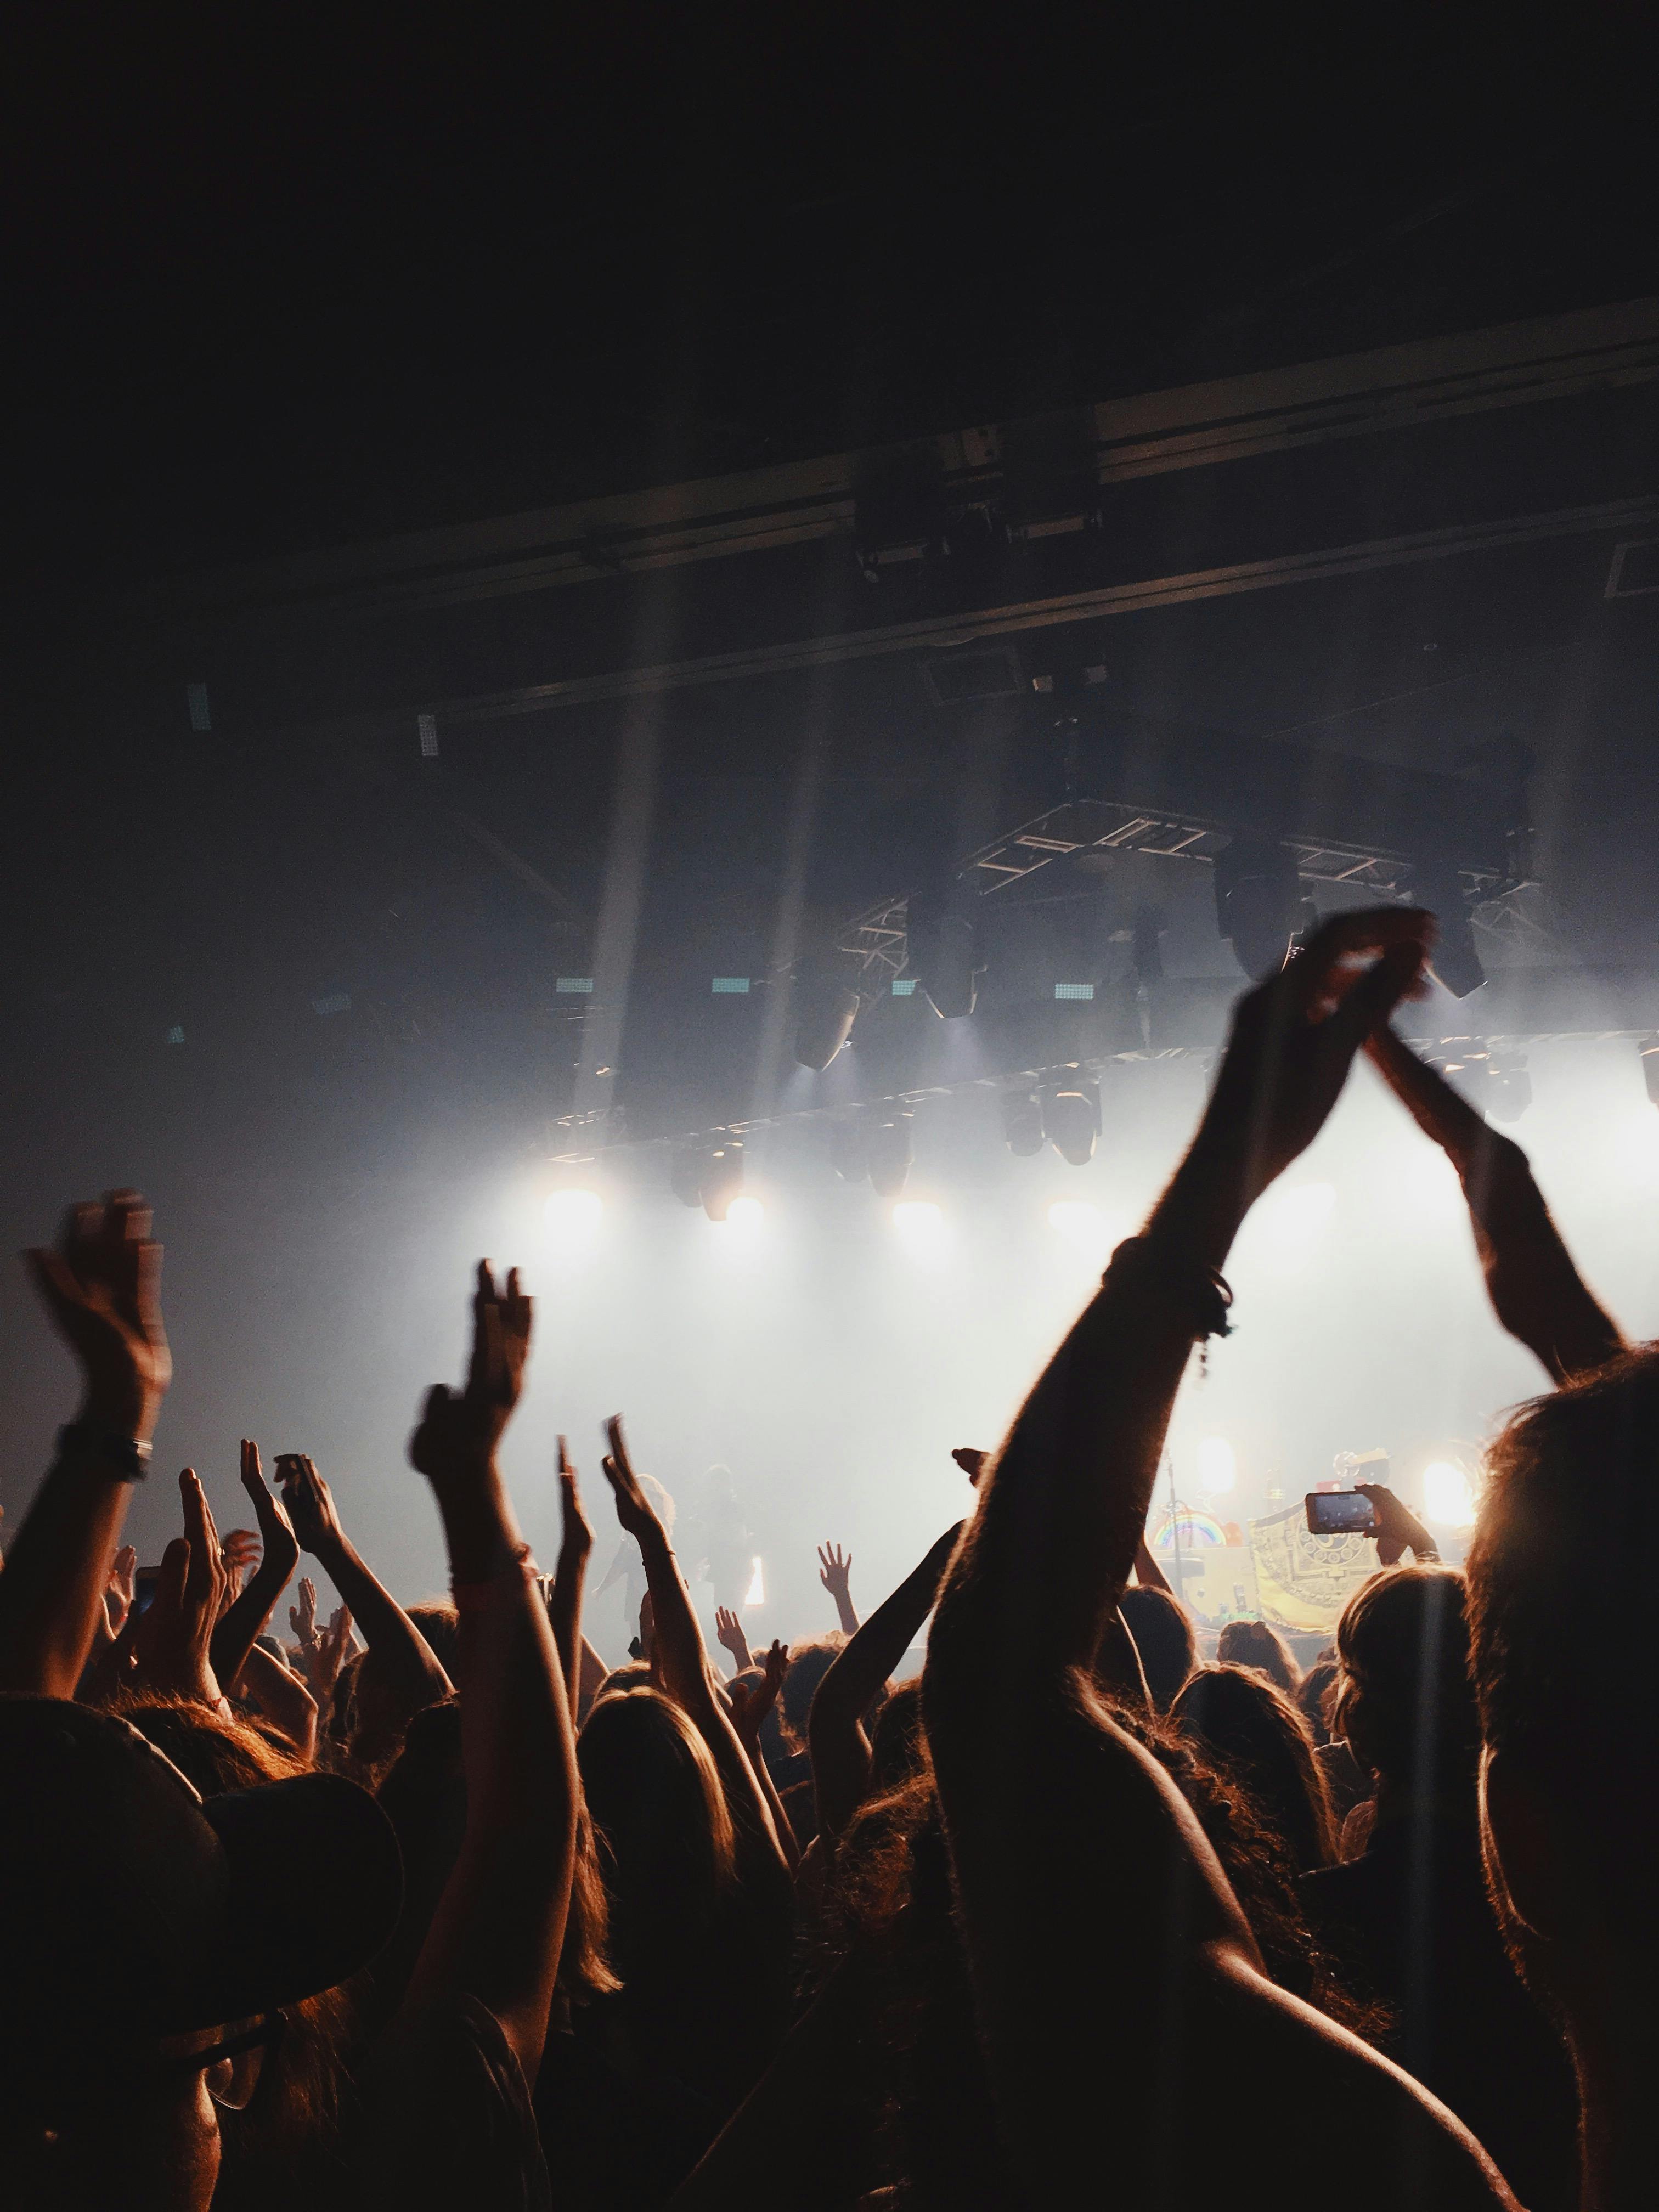 Concert Photos, Download The BEST Free Concert Stock Photos & HD Images